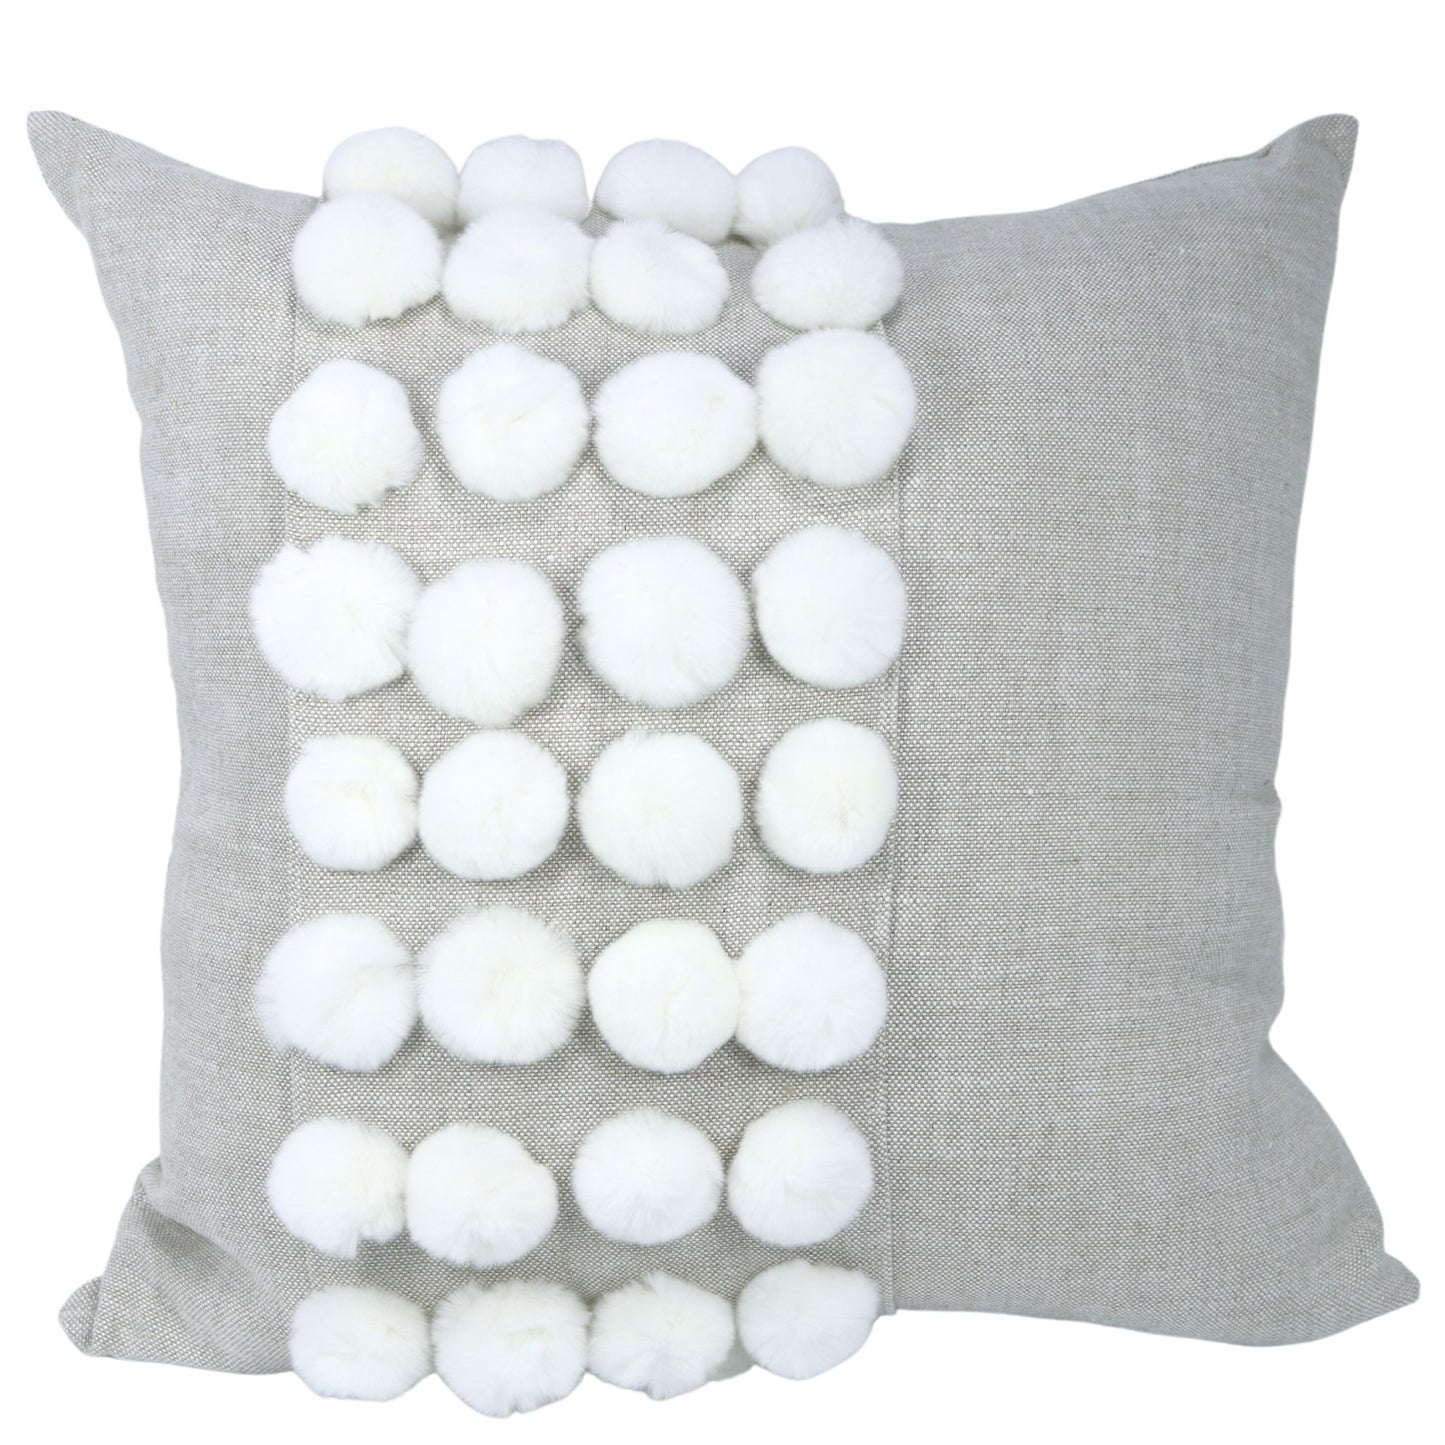 Natural Linen Pillow with Pom Poms